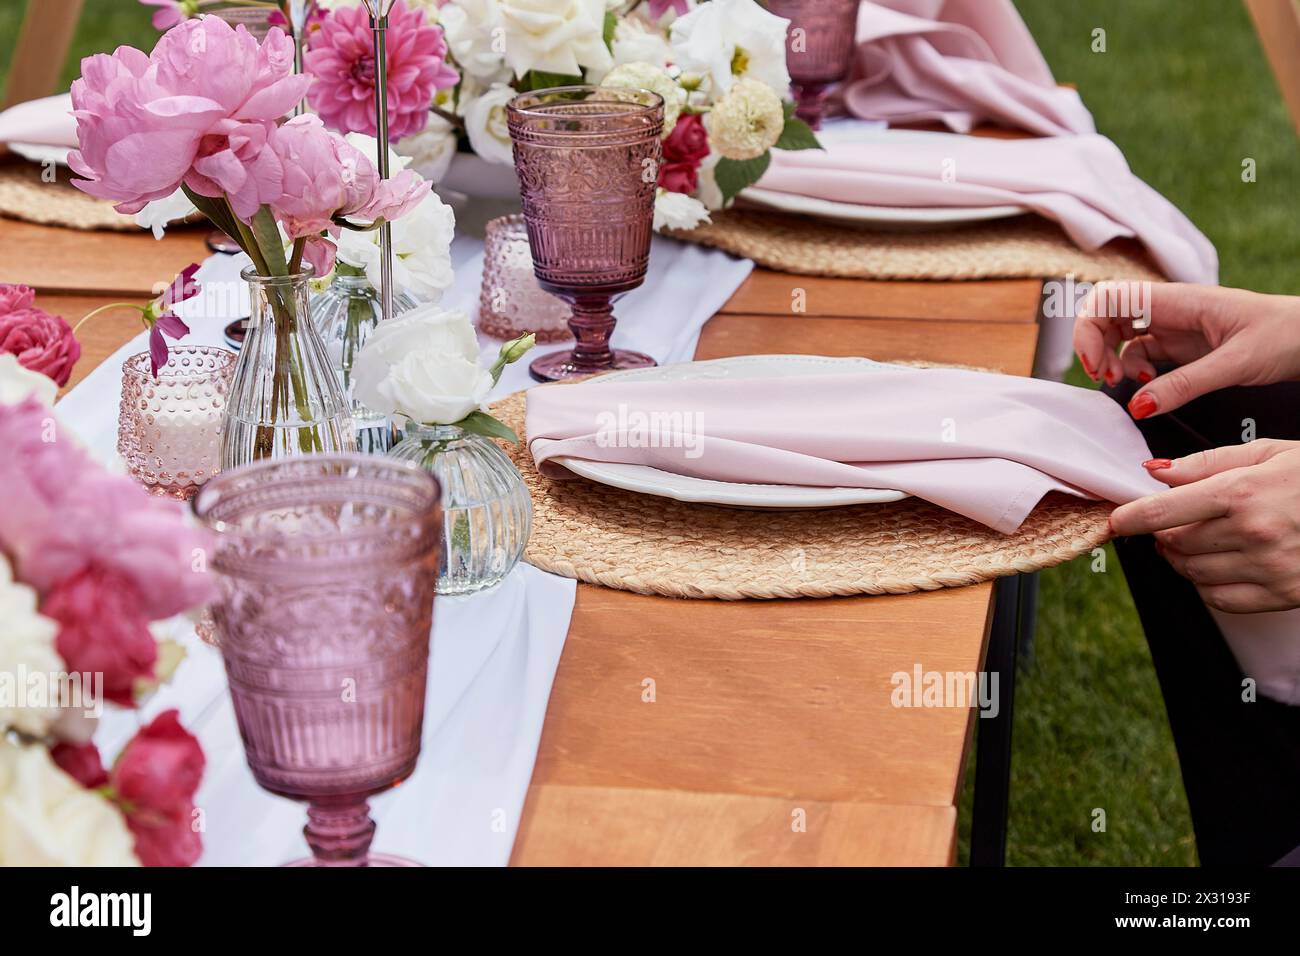 Picnic aesthetics table setting, flowers arrangement. Tabletop with floral decoration and place settings. Dining etiquette and table decor concept. Stock Photo